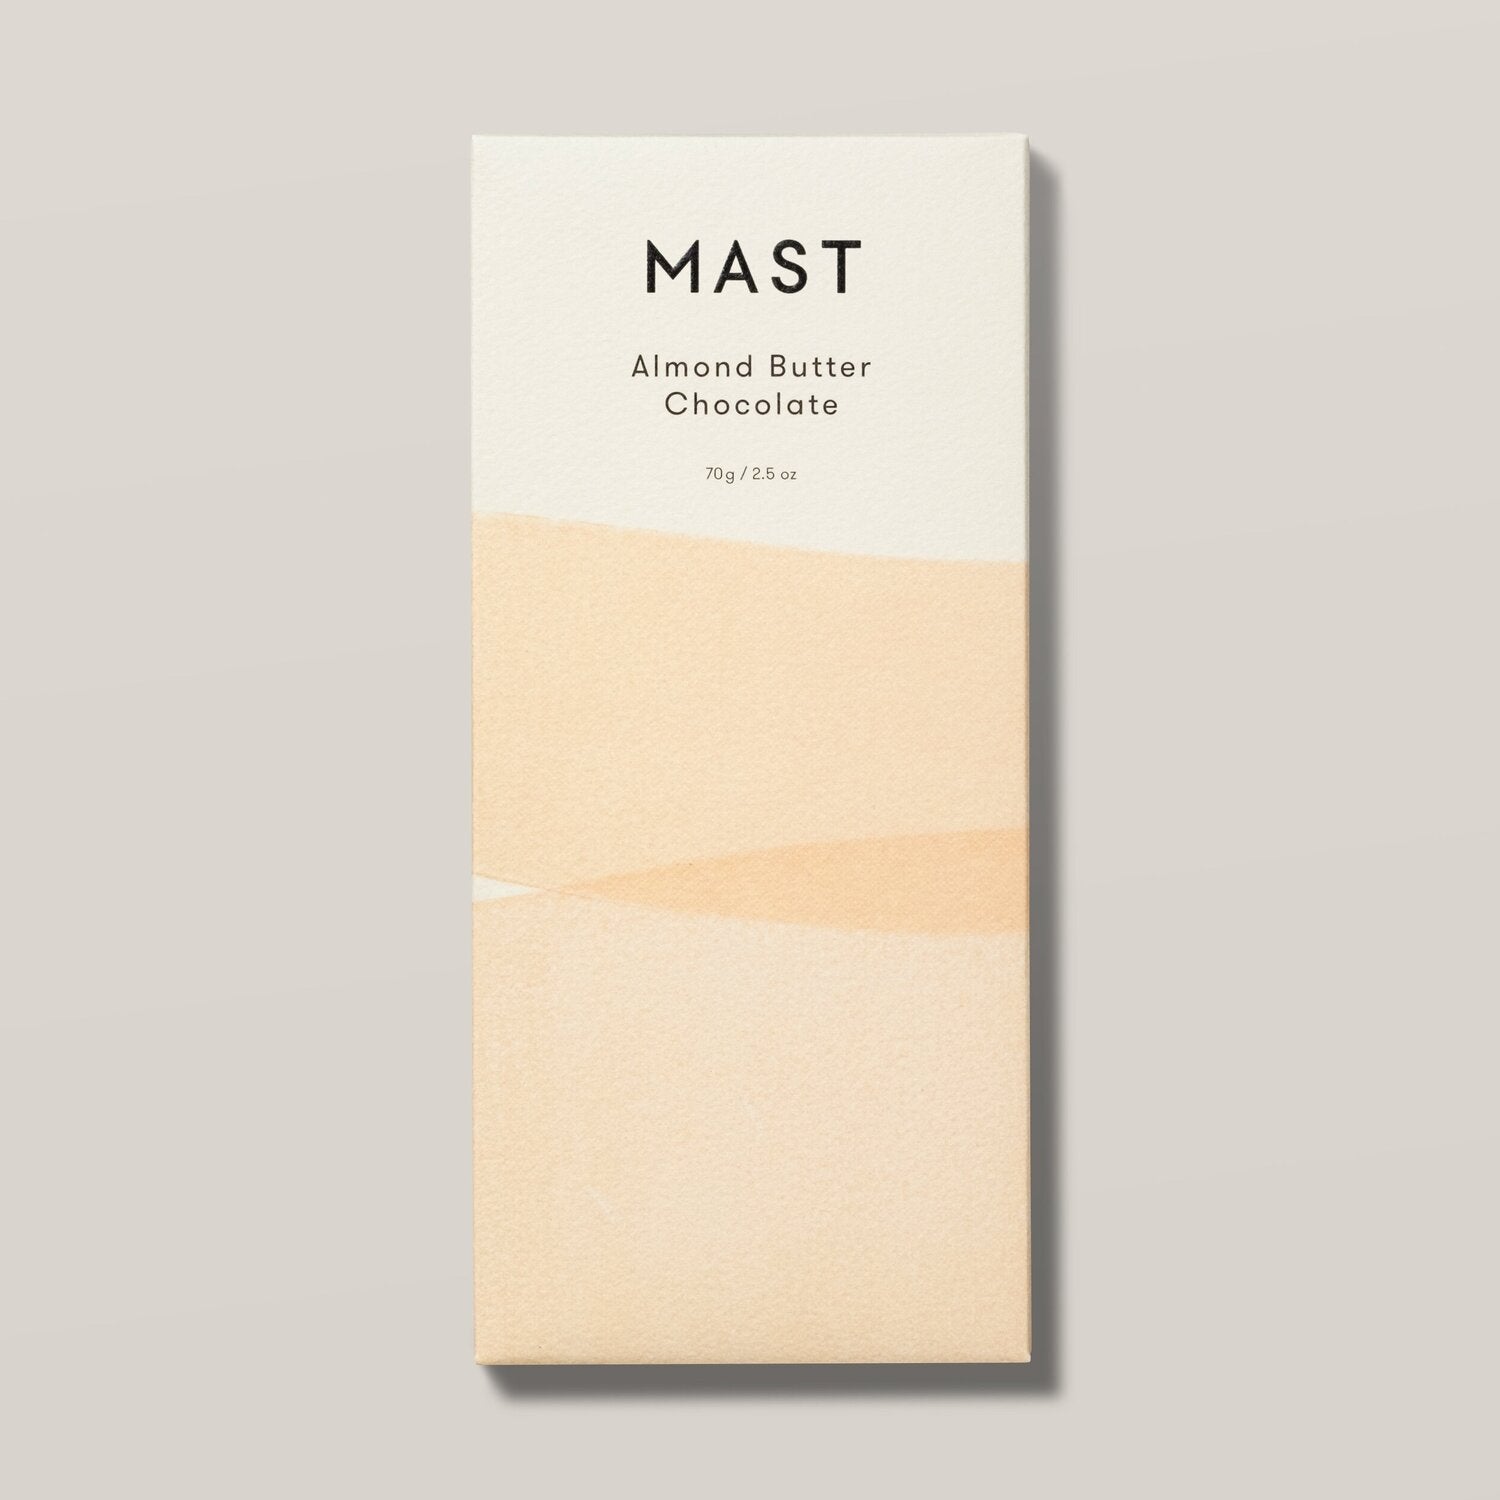 Mast Brother Chocolate |Almond Butter Chocolate Bar